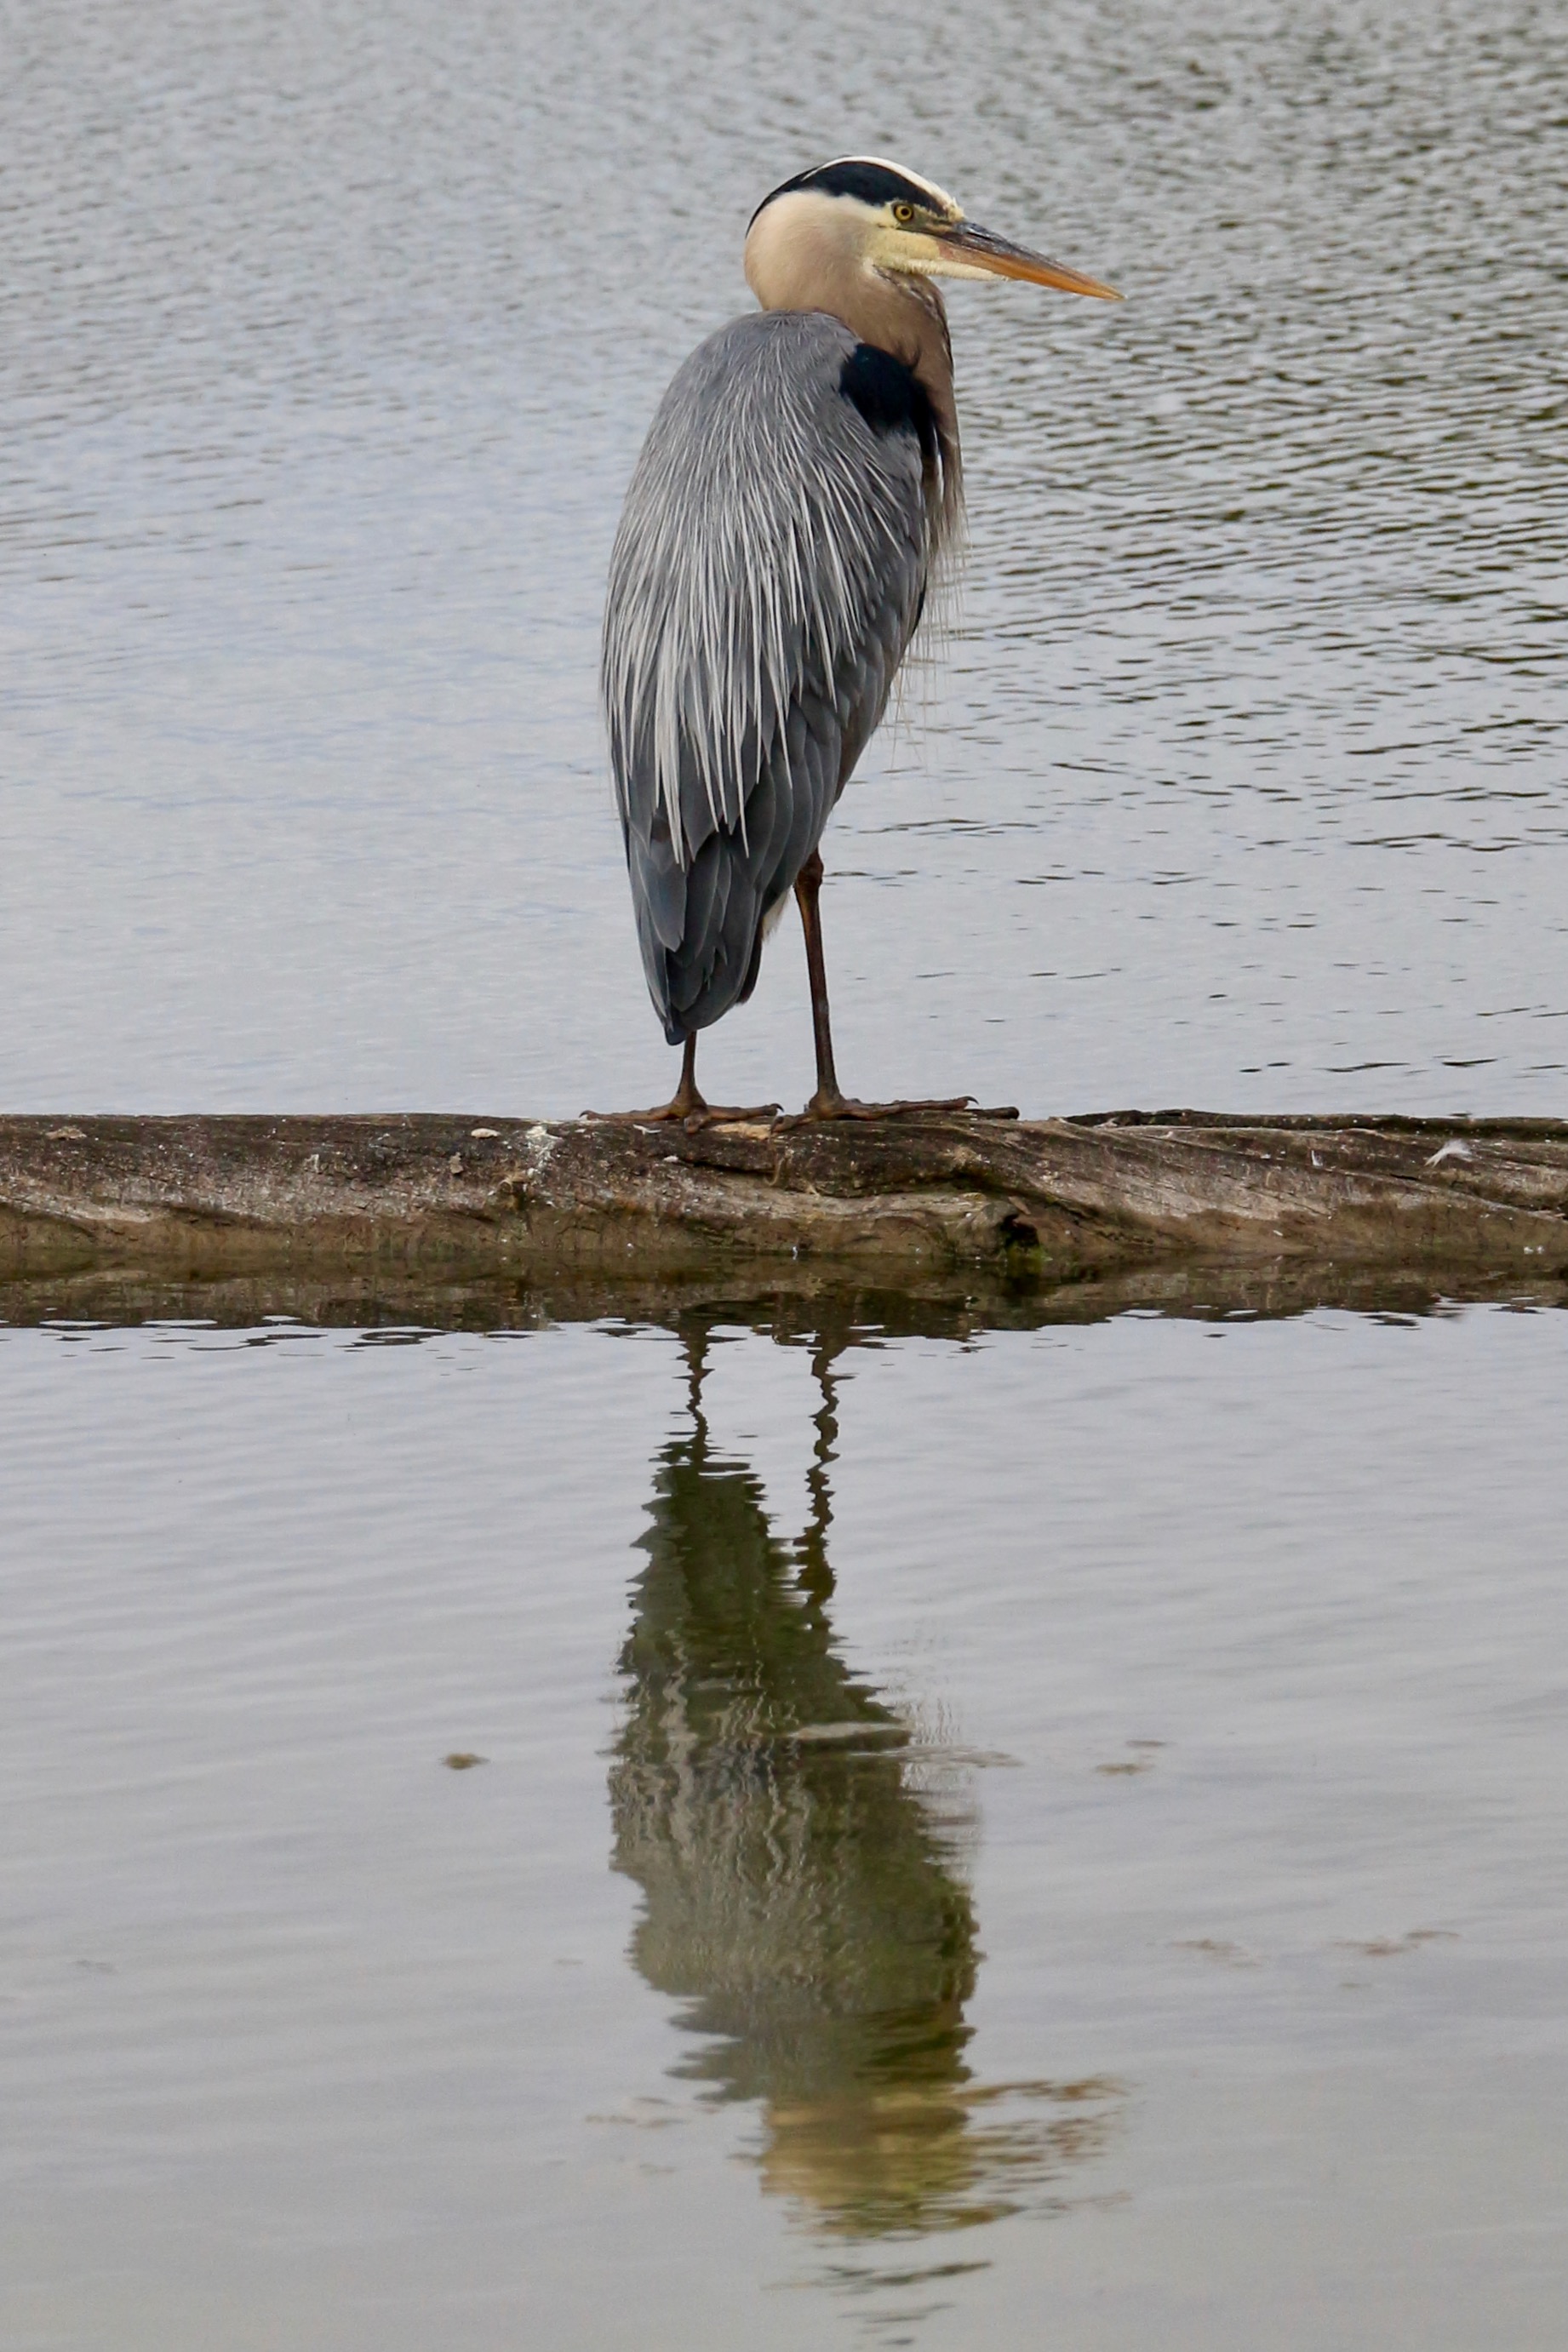 A majestic great blue heron stands on a log in the middle of water and looks at my camera. Its image is reflected in the water below it, creating a nearly perfect mirror image. These birds are large and grey and have white heads with a black racing stripe going down the side. They are experts at fishing.
